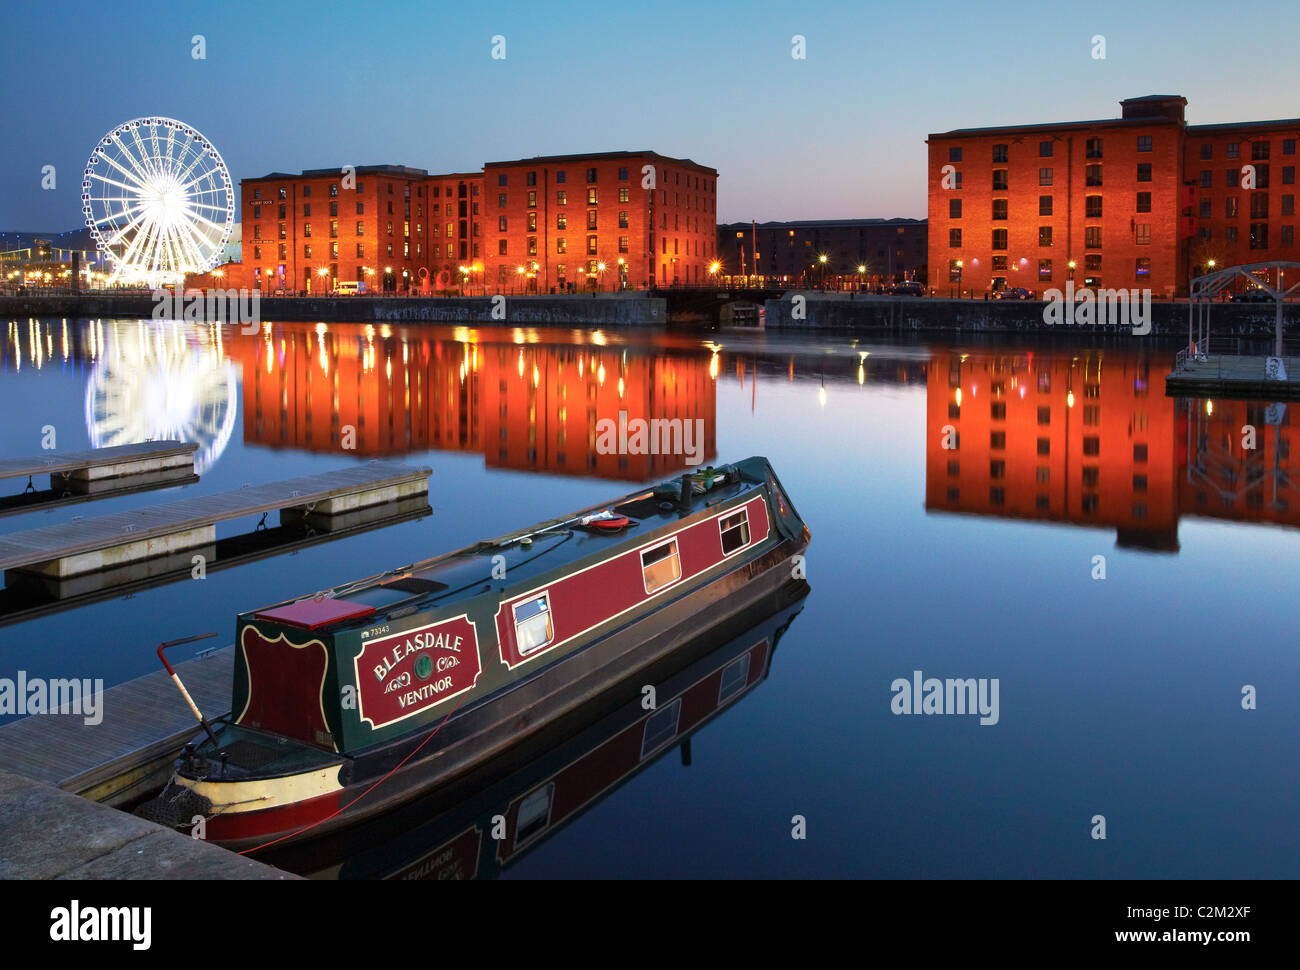 Narrowboat at Salthouse Dock, Liverpool at night with the buildings of the Albert Dock and the Echo Big Wheel in the background Stock Photo